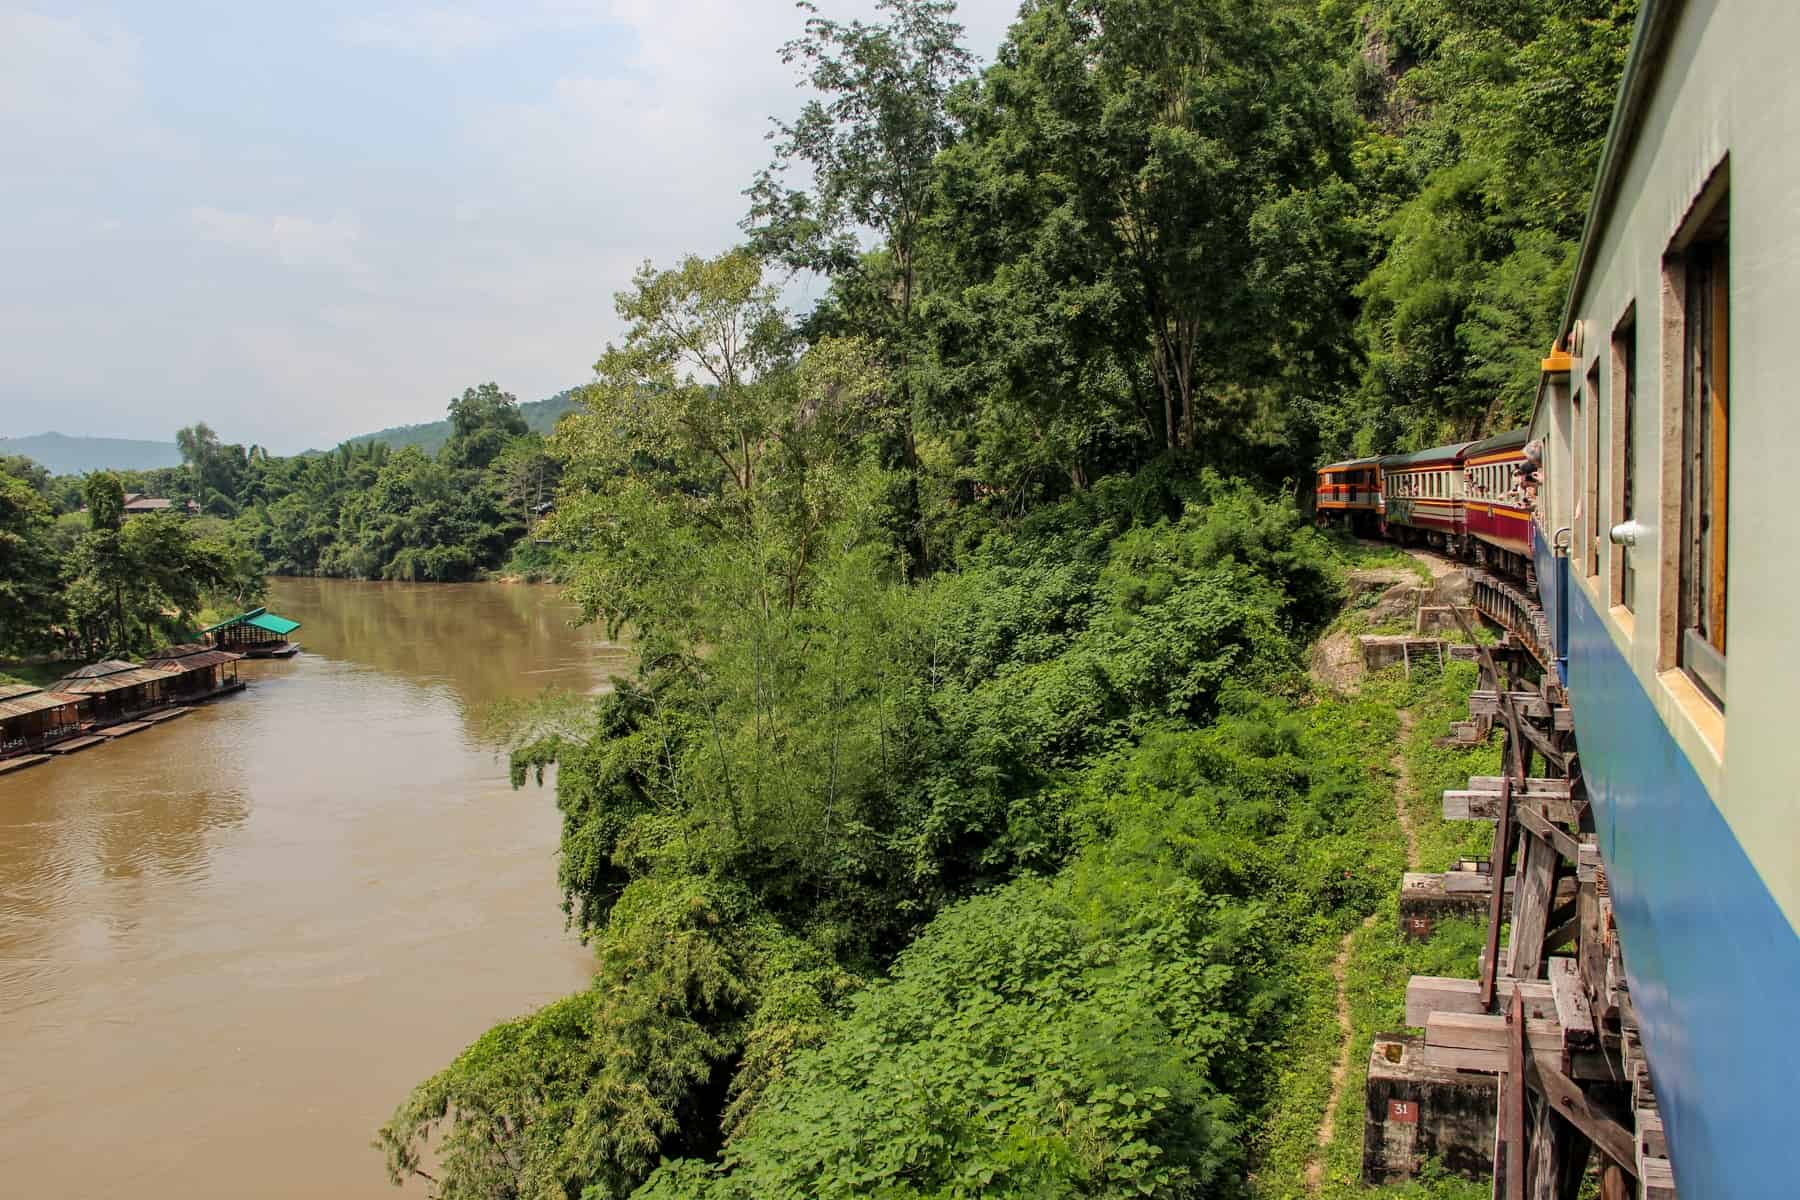 People lean out of a blue and white train - the Death Railway in Kanchanaburi – as it curves past a jungle green river bank.